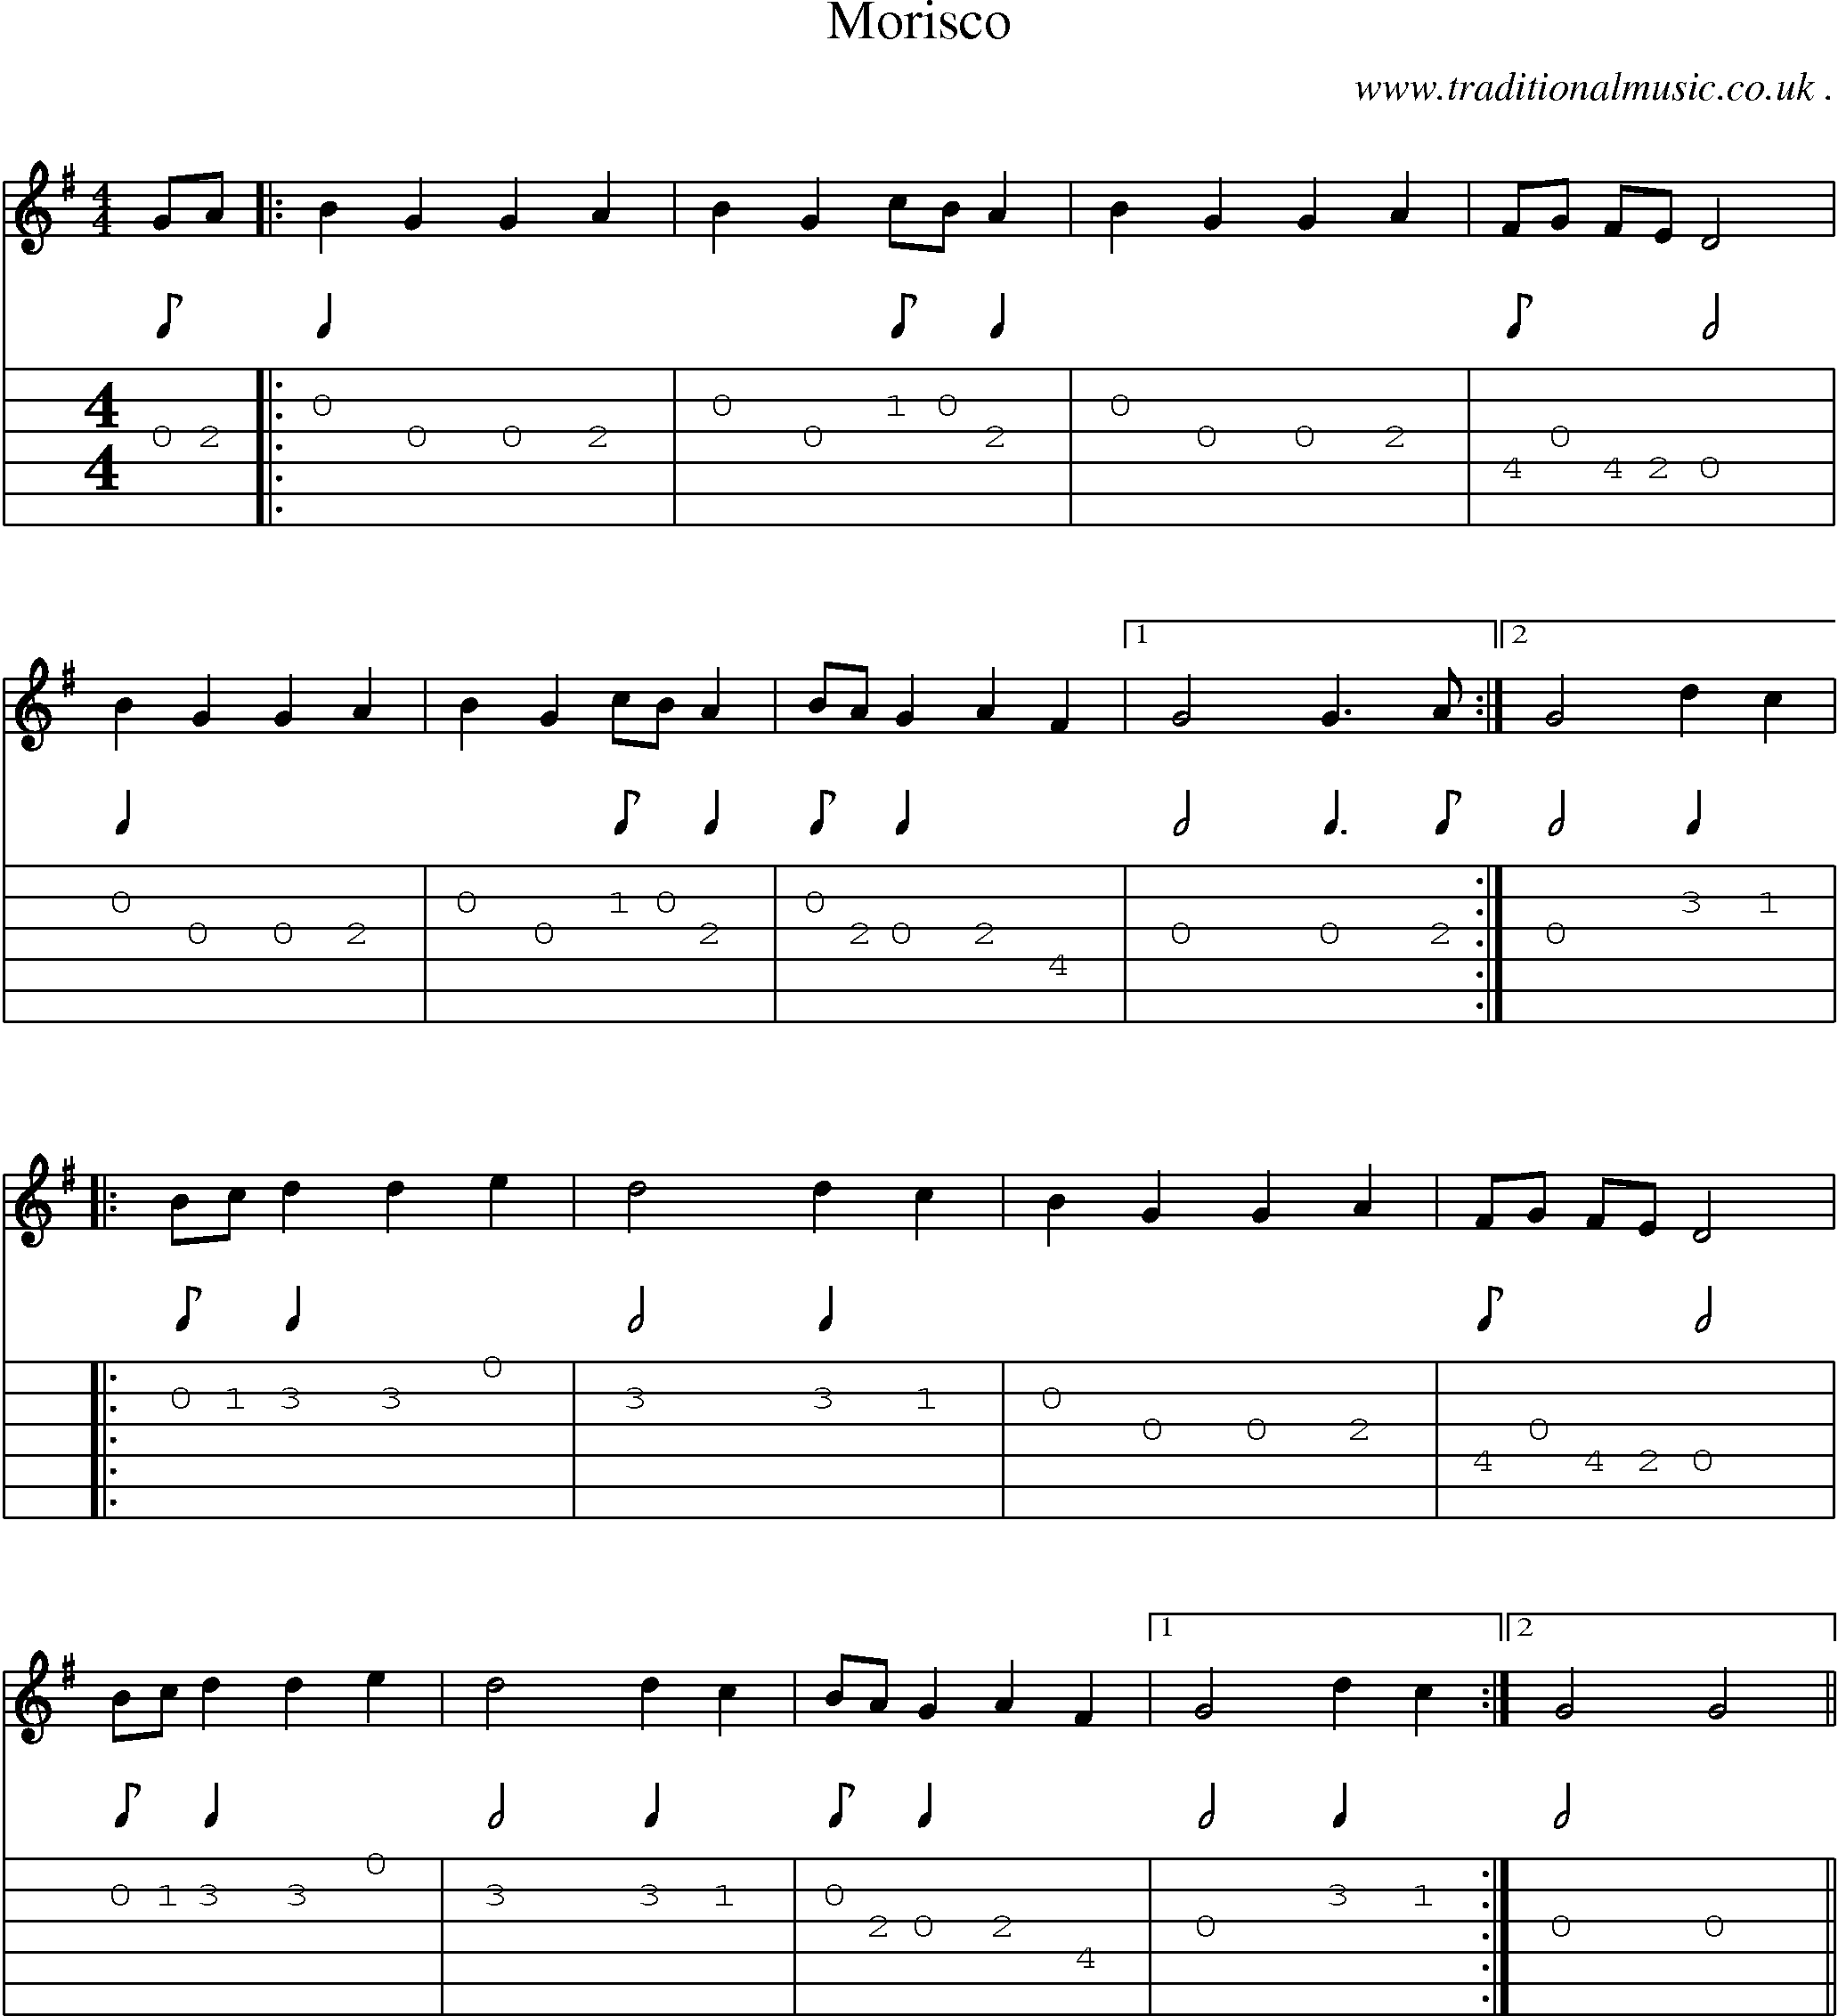 Sheet-Music and Guitar Tabs for Morisco